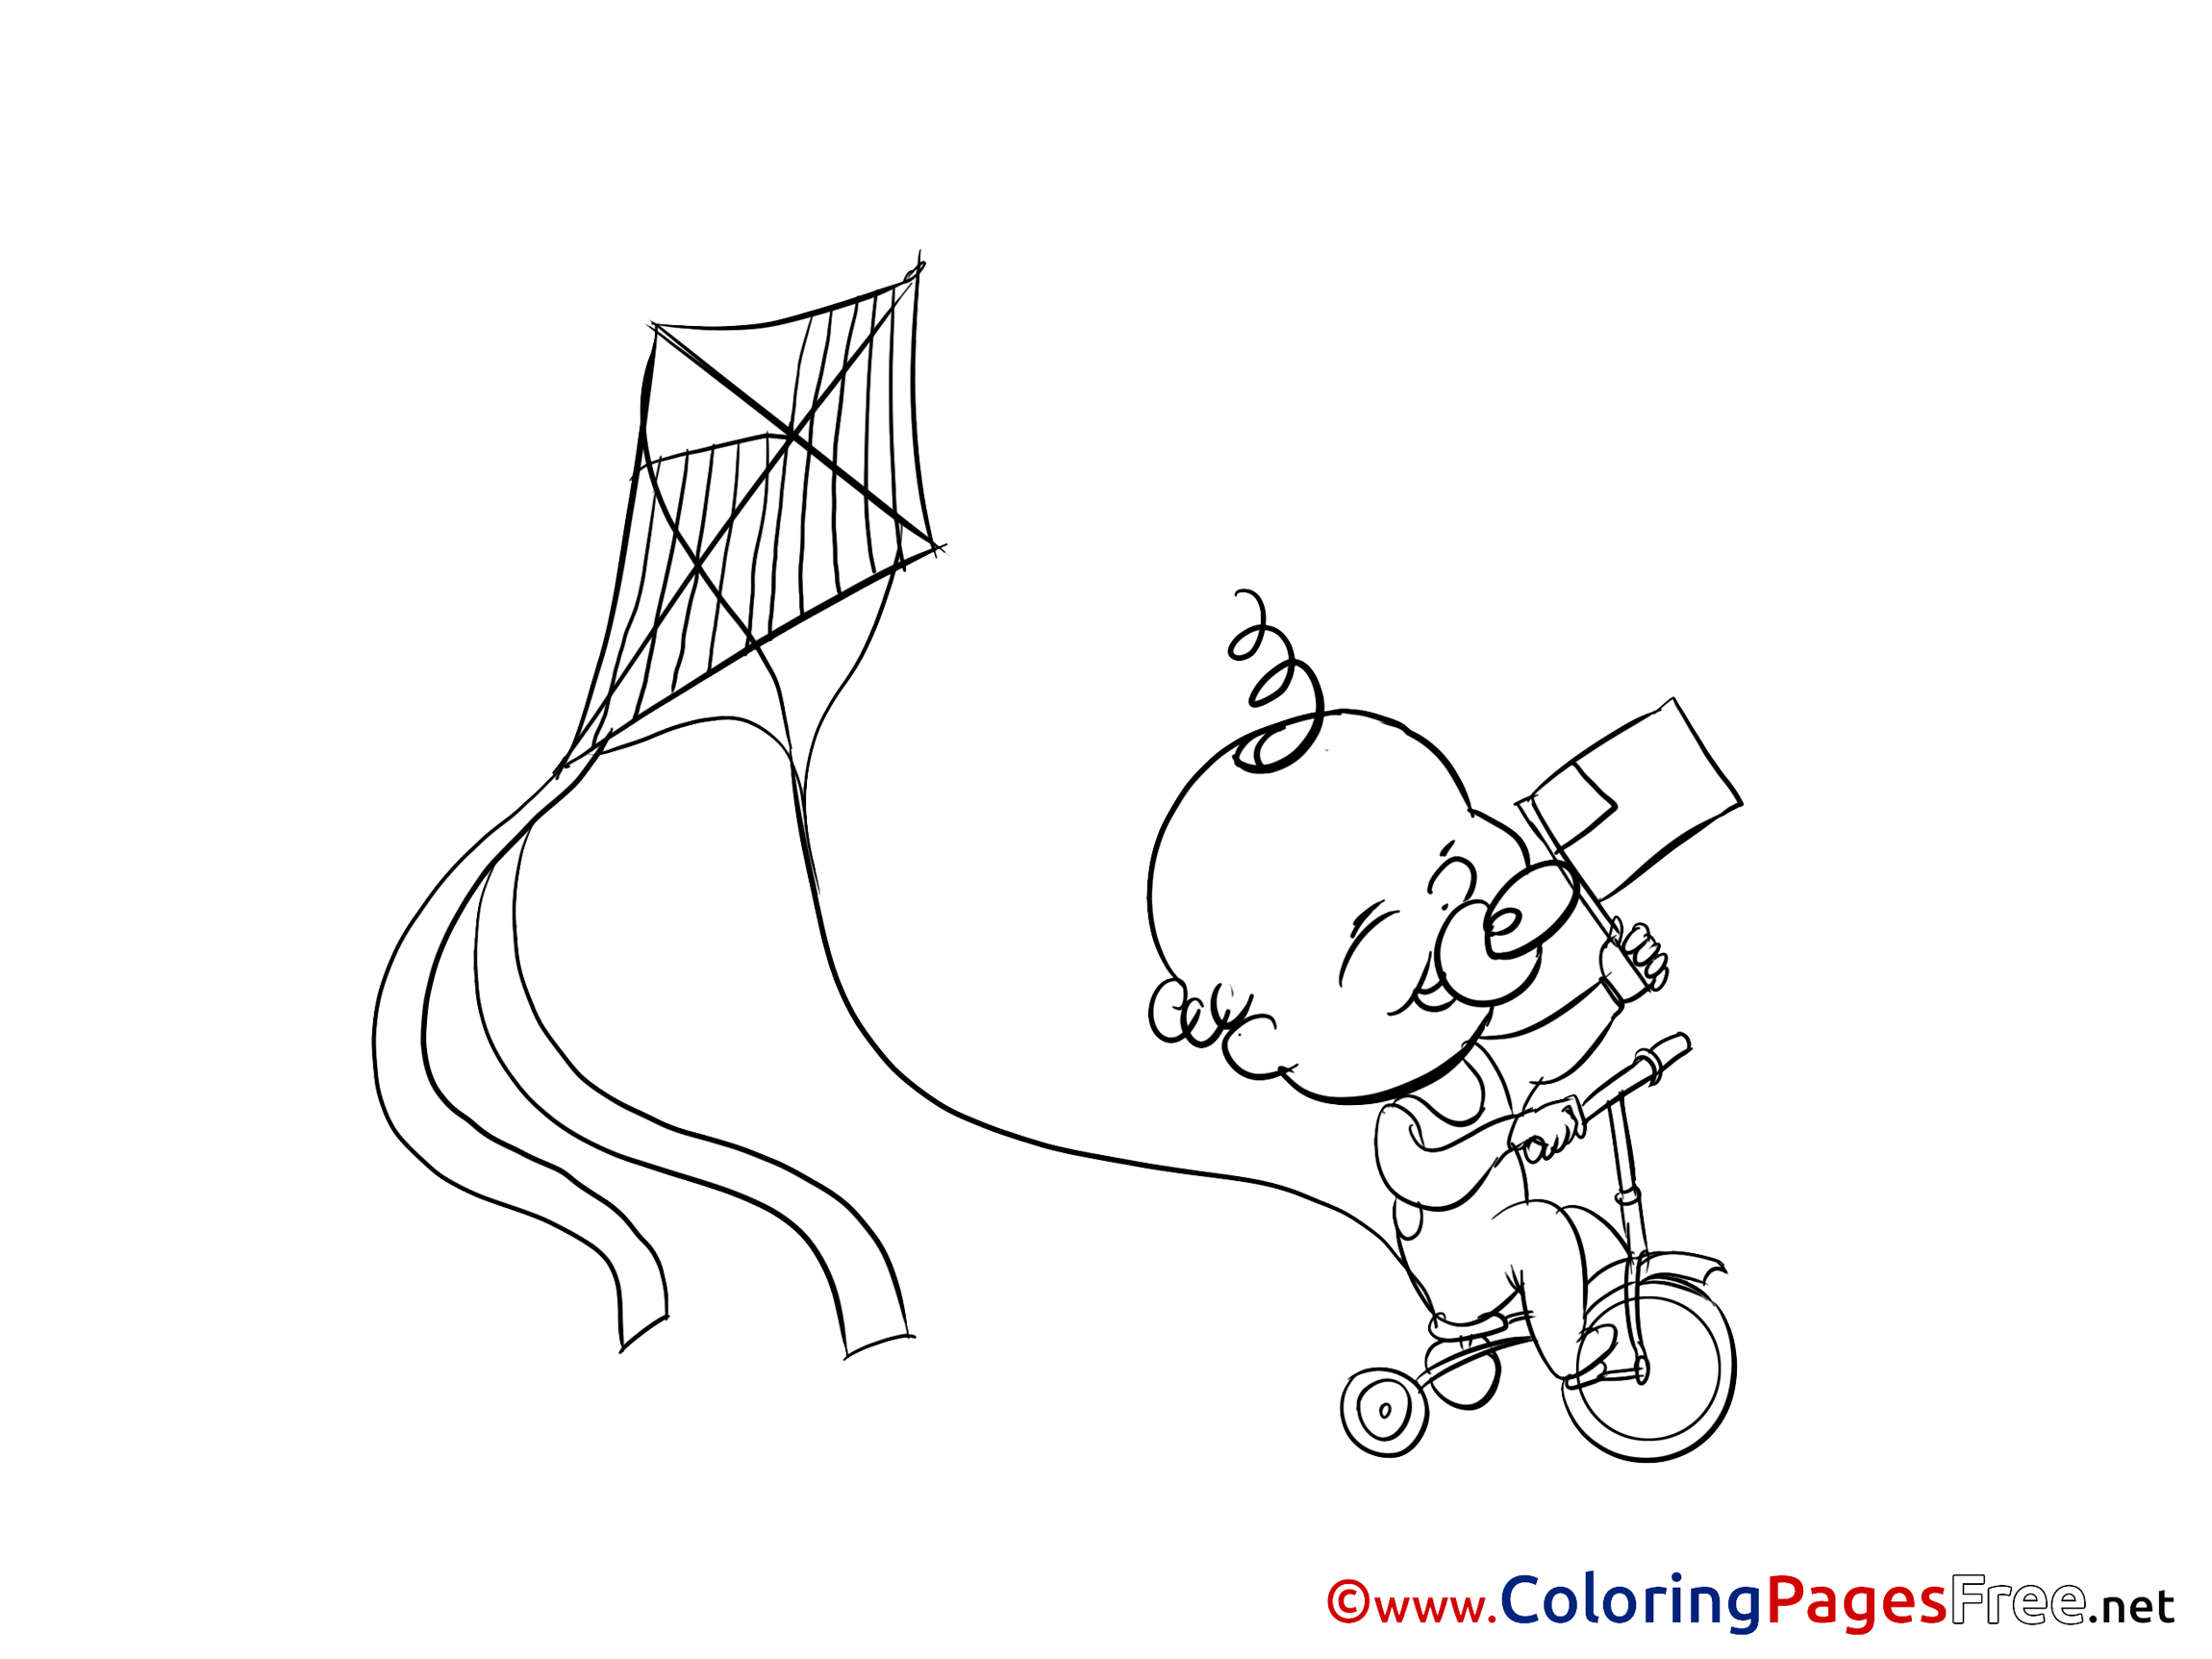 Free Coloring Pages Kid download